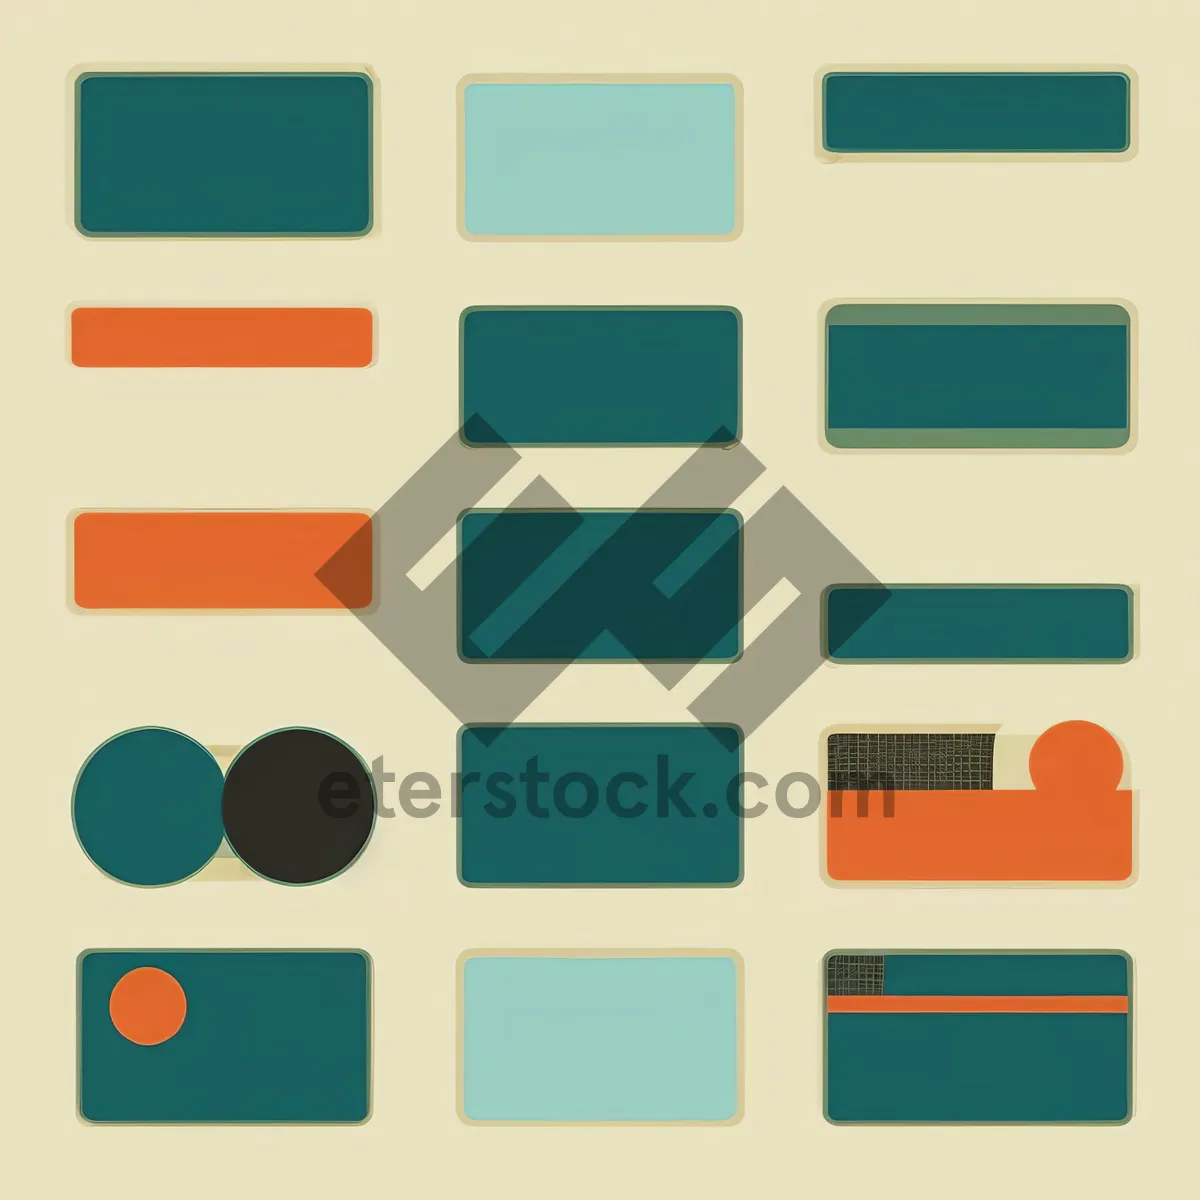 Picture of Glossy Web Icon Set: Stylish Symbol Buttons